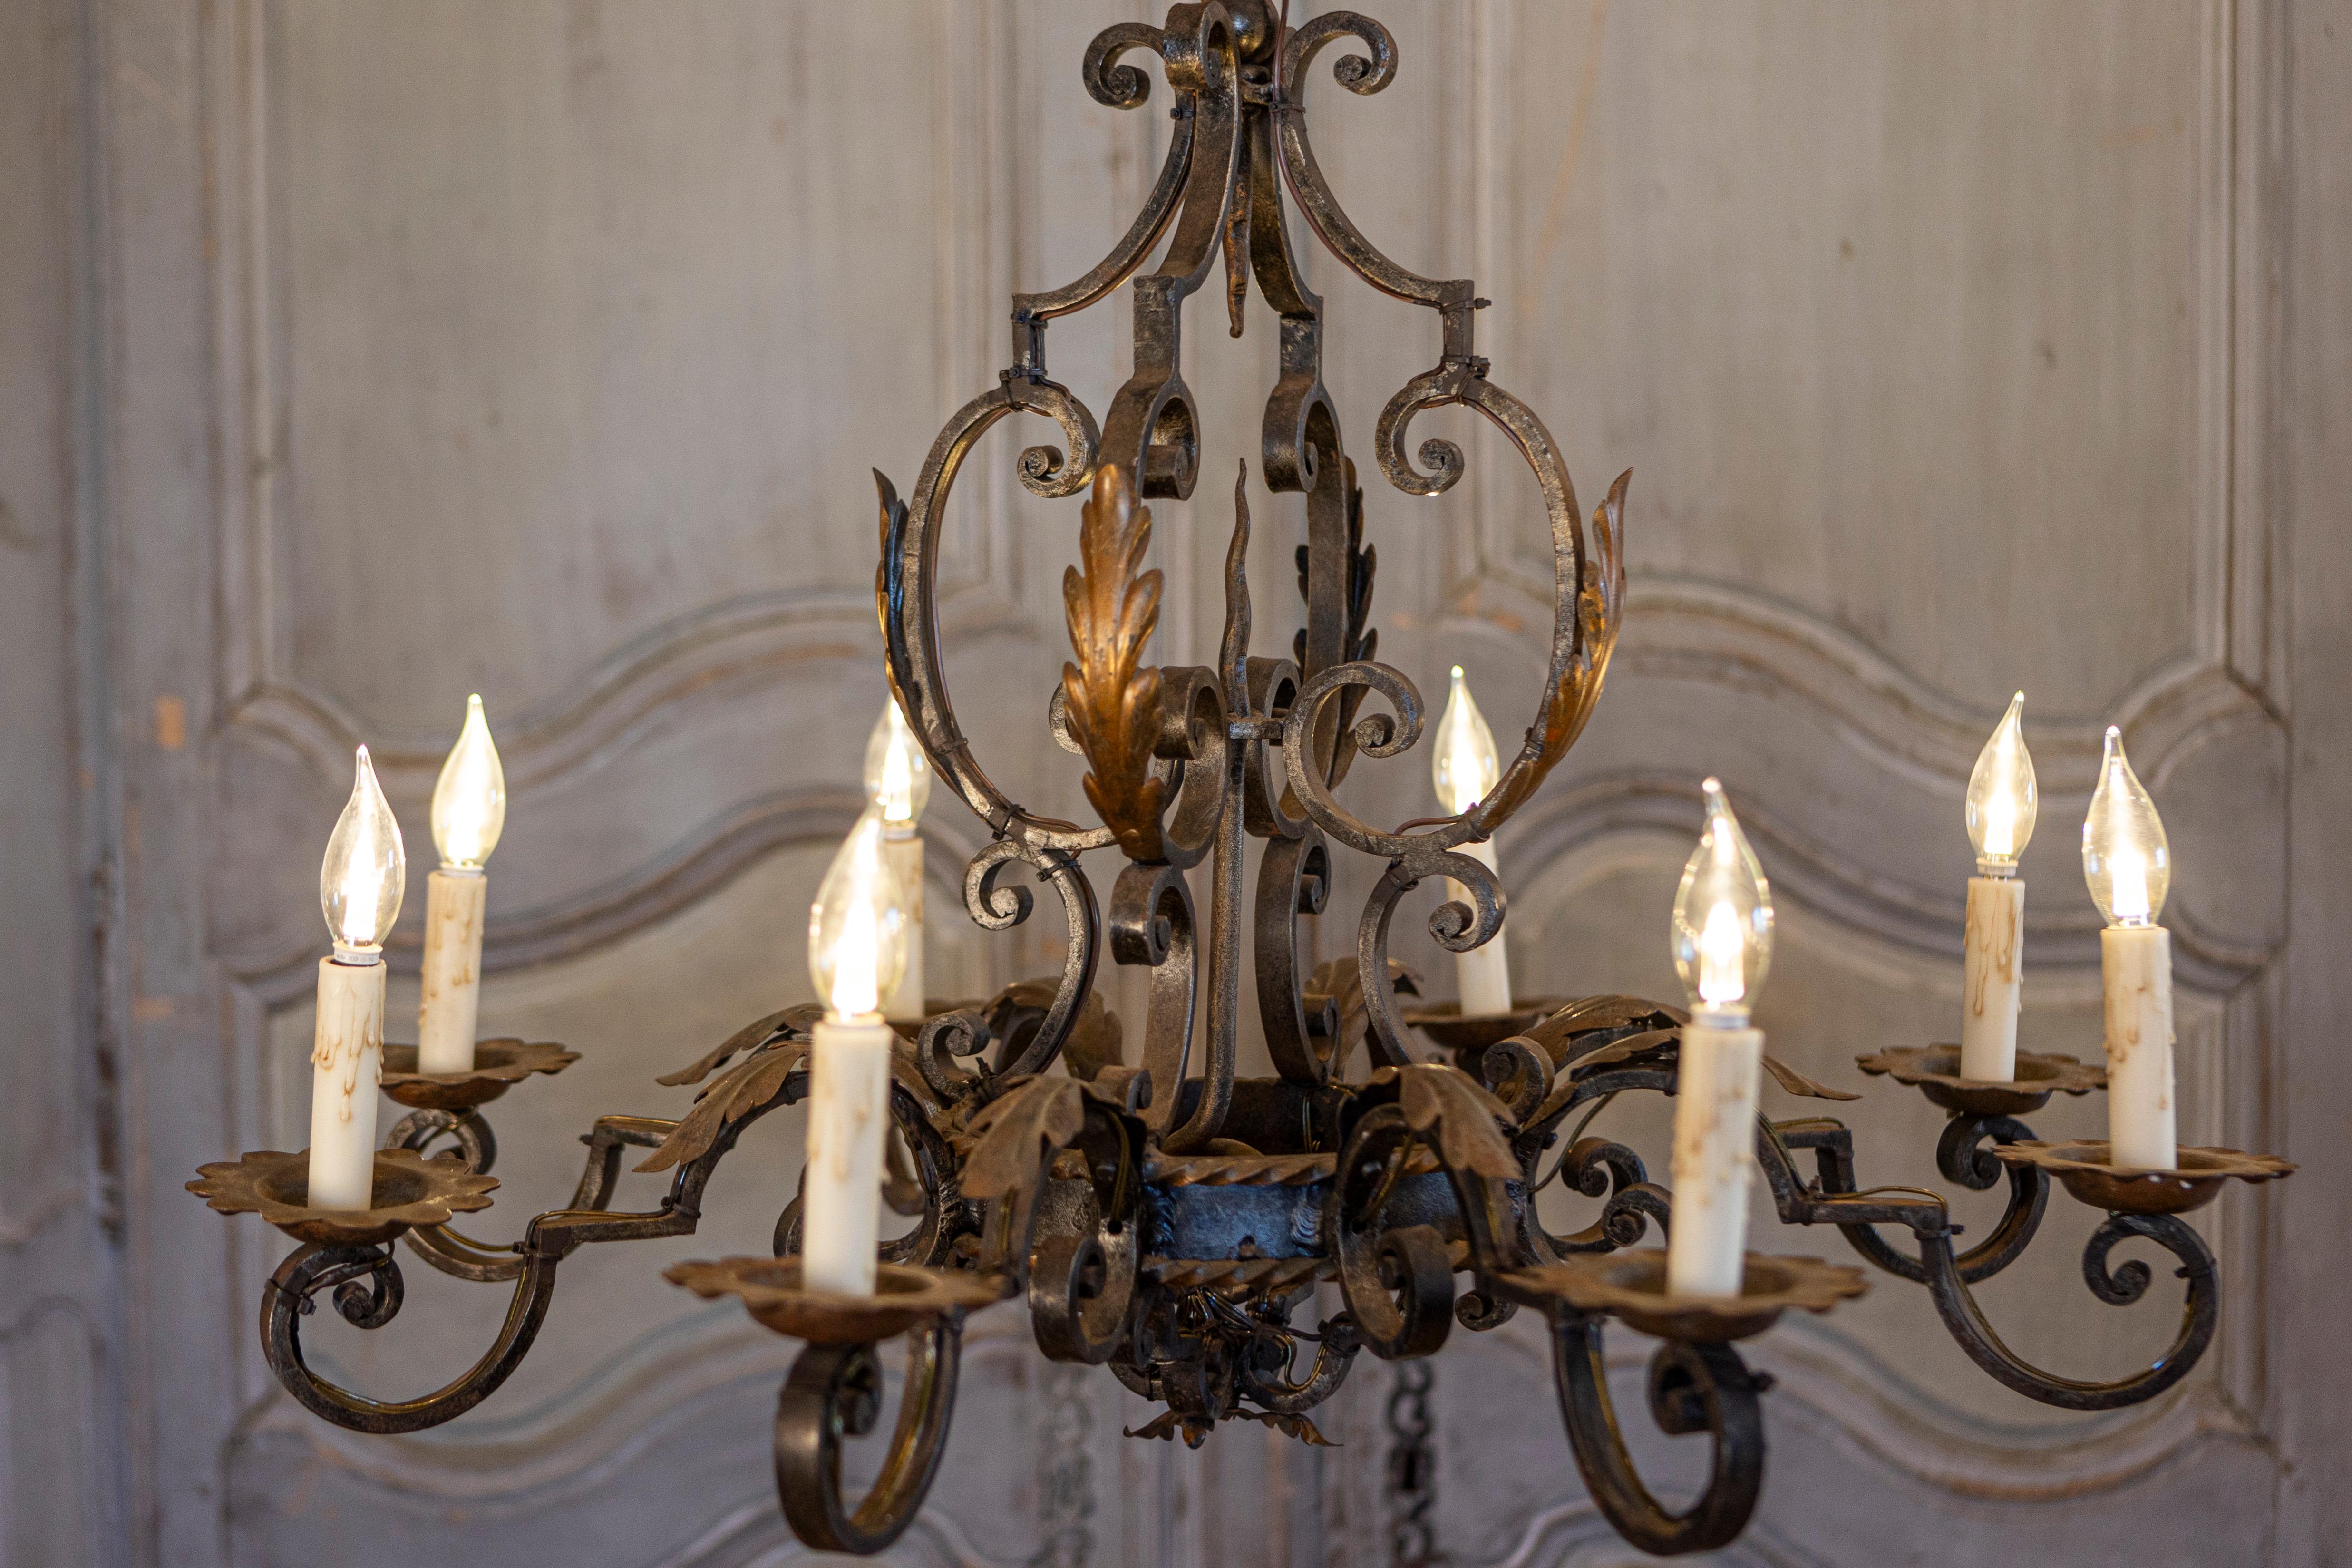 French Wrought Iron Eight-Light Chandelier with Scrolling Arms and Acanthus Leaf In Good Condition For Sale In Atlanta, GA